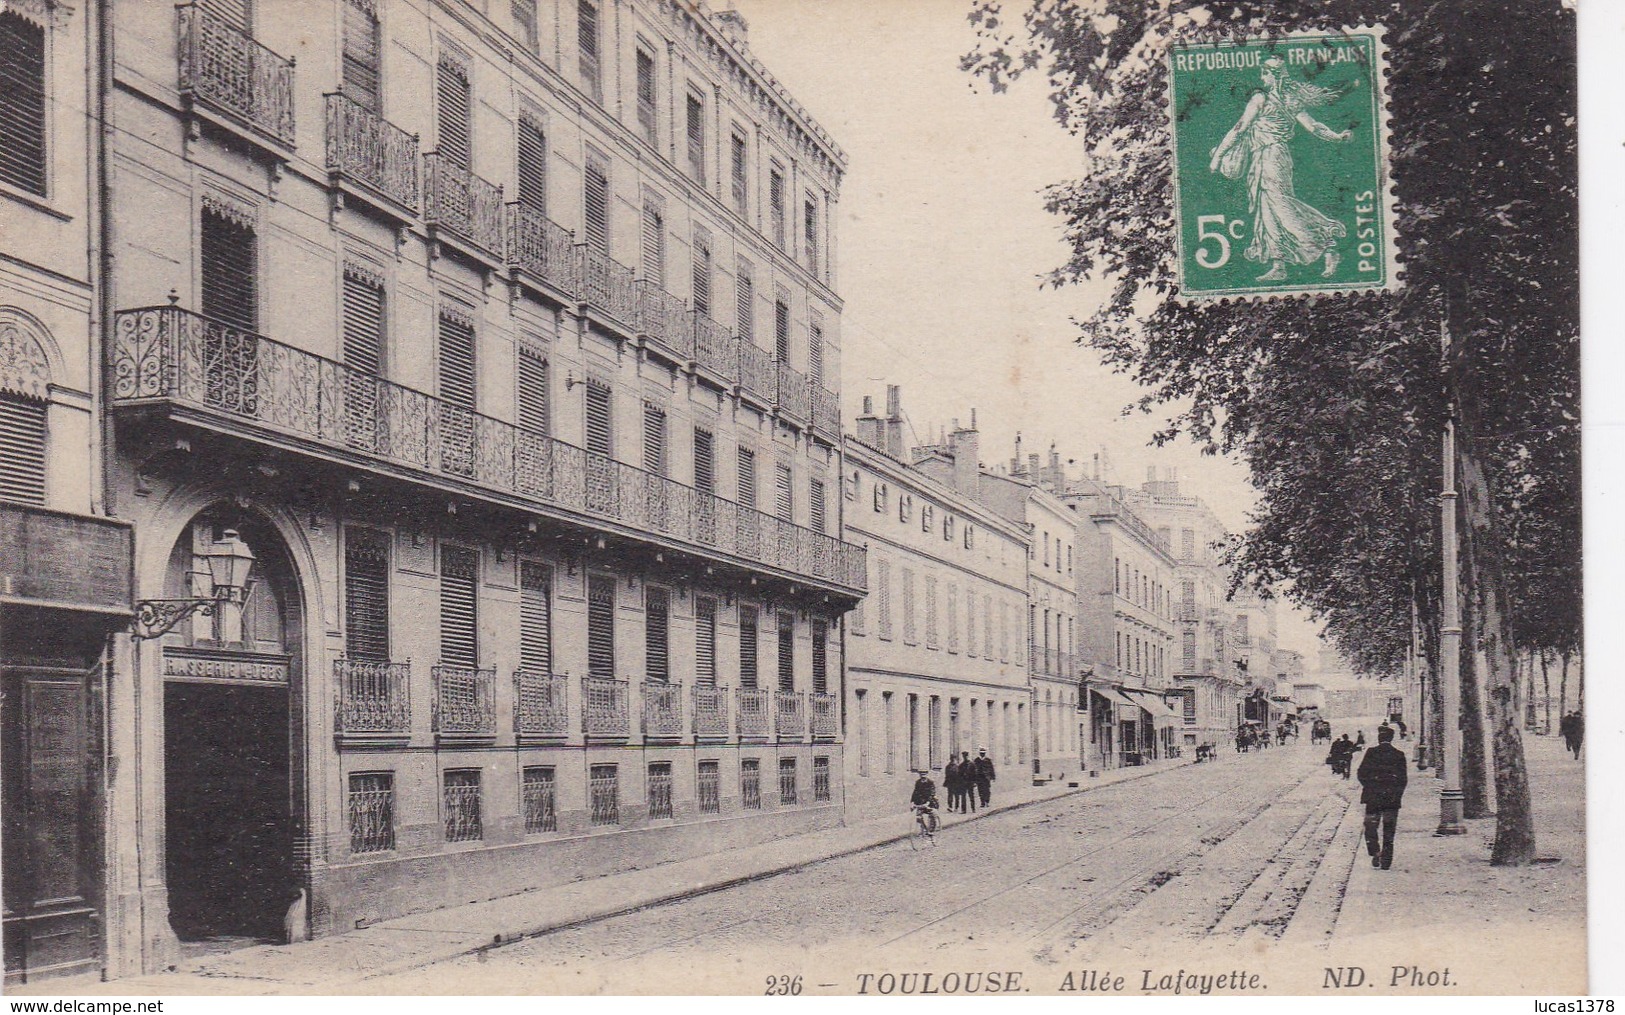 31 / TOULOUSE / ALLEE LAFAYETTE / ND 236 - Toulouse